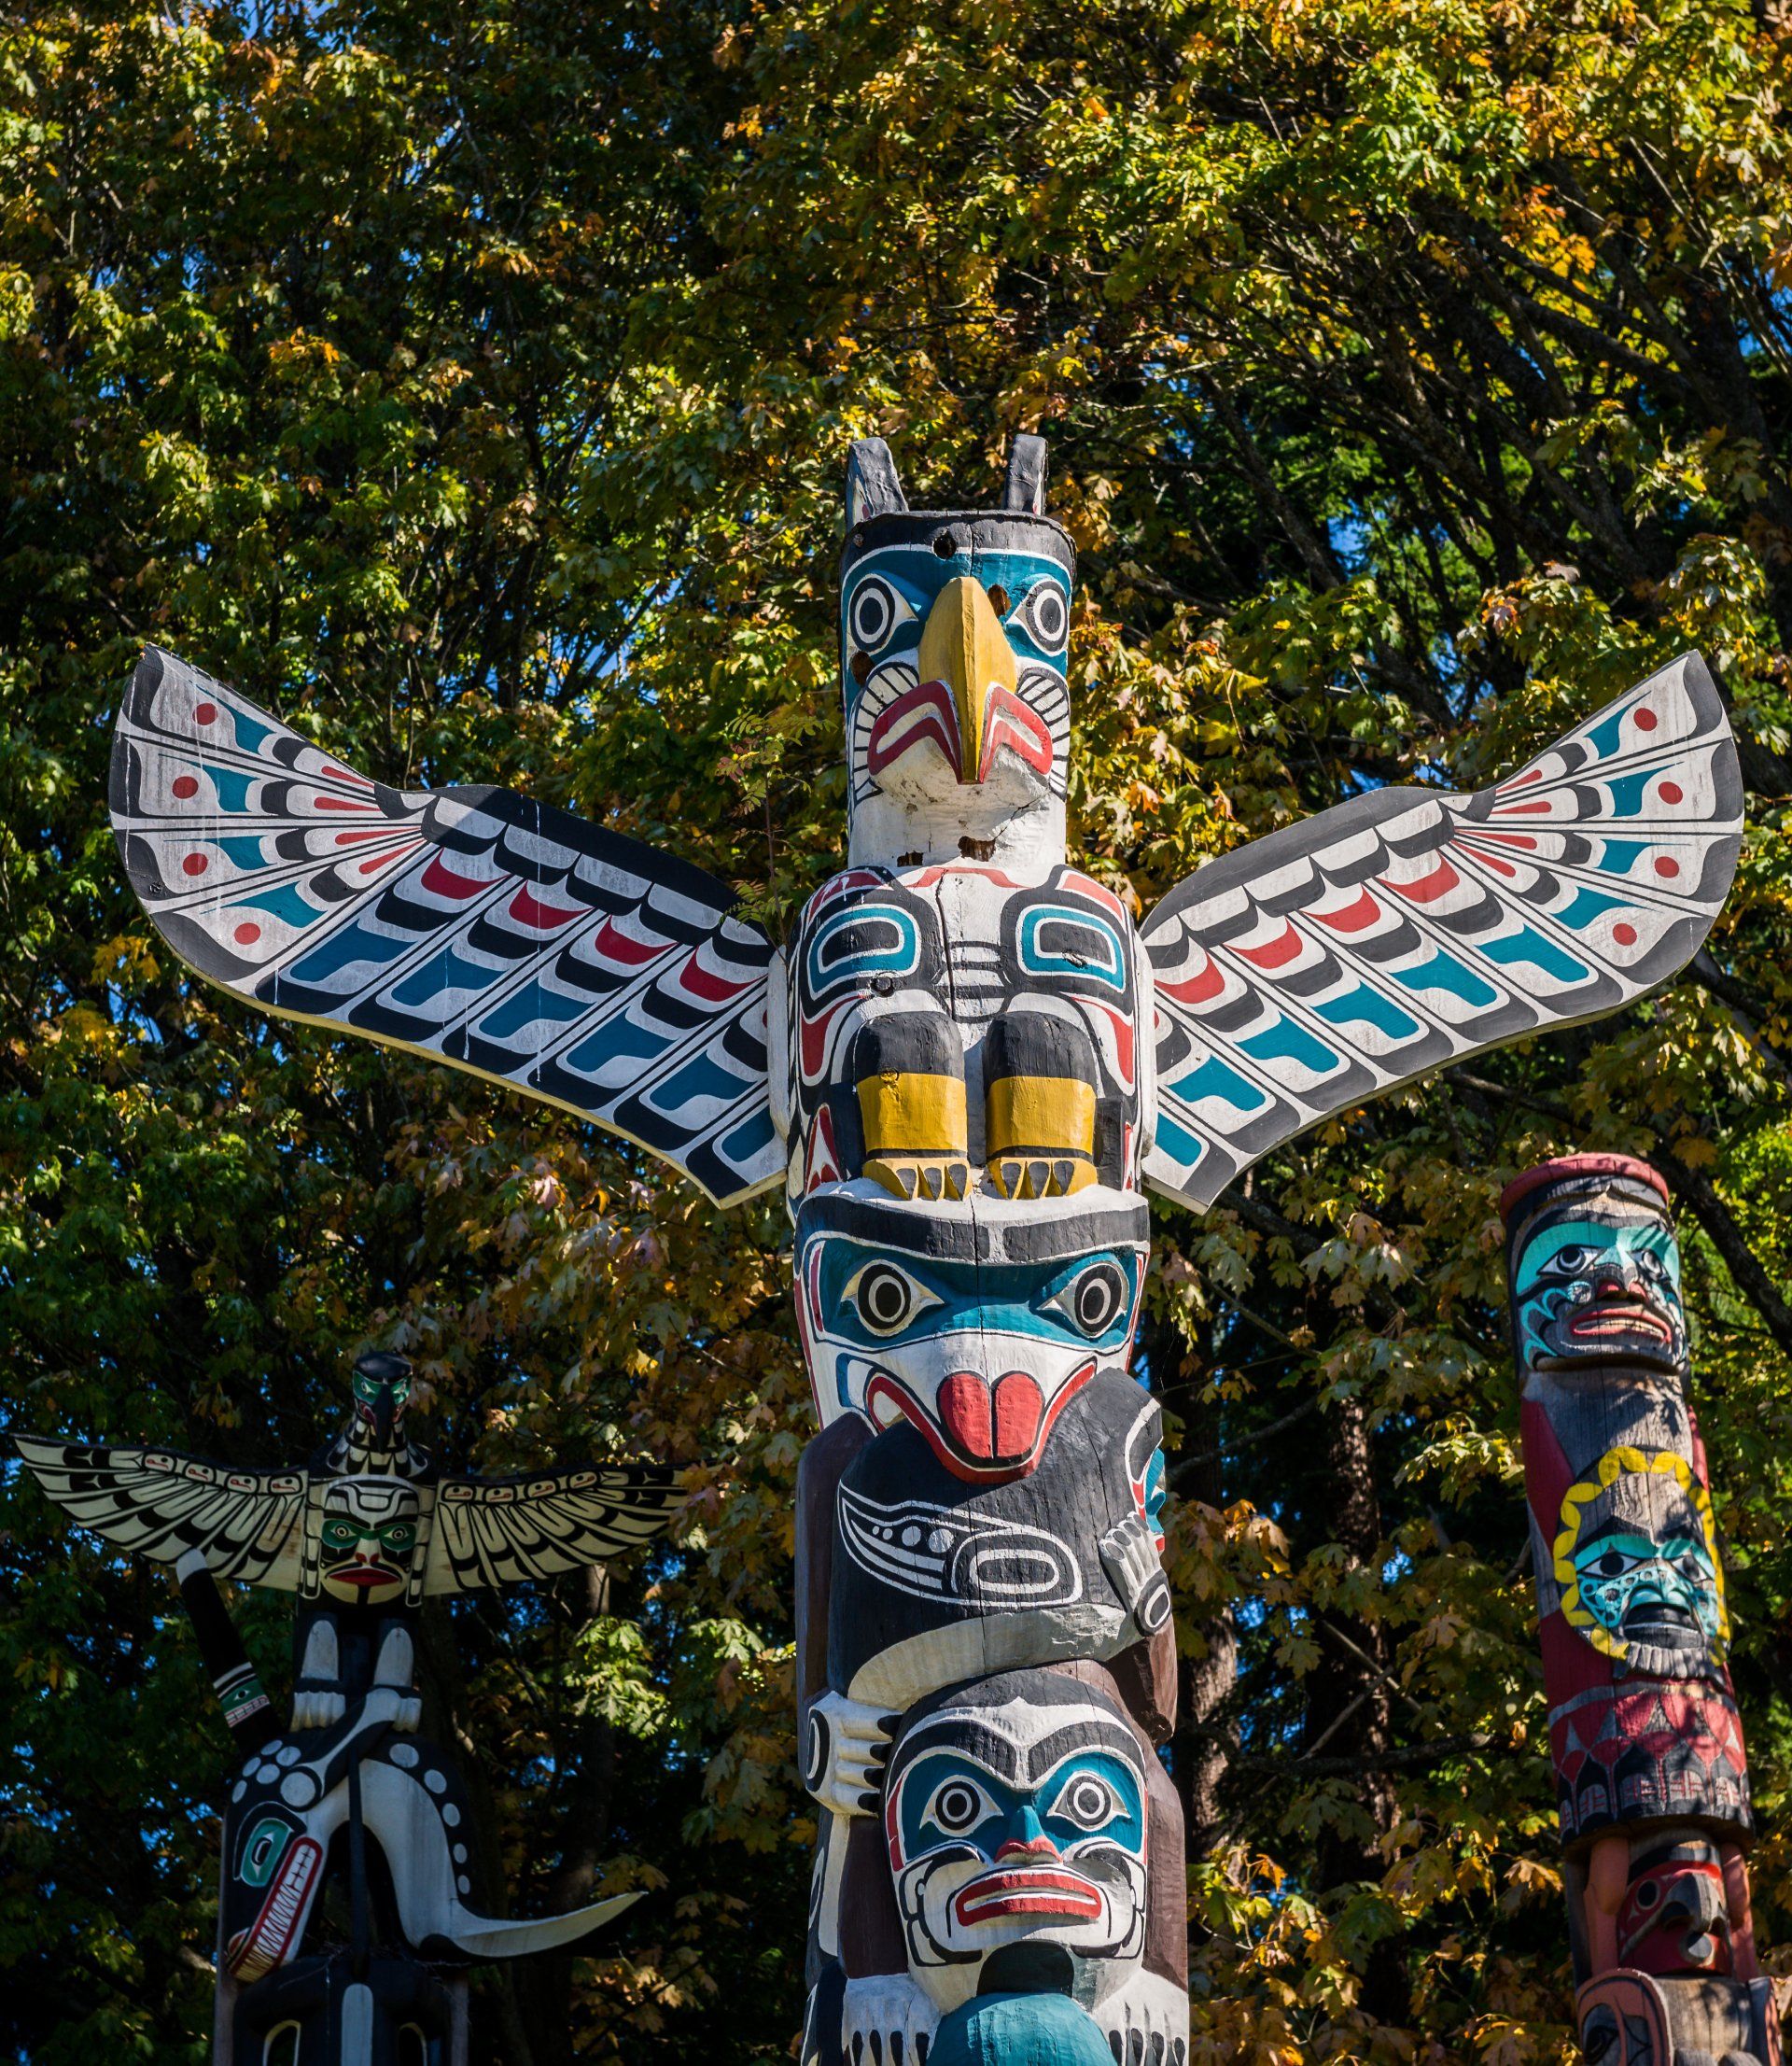 A totem pole with a bird on top of it is surrounded by trees.